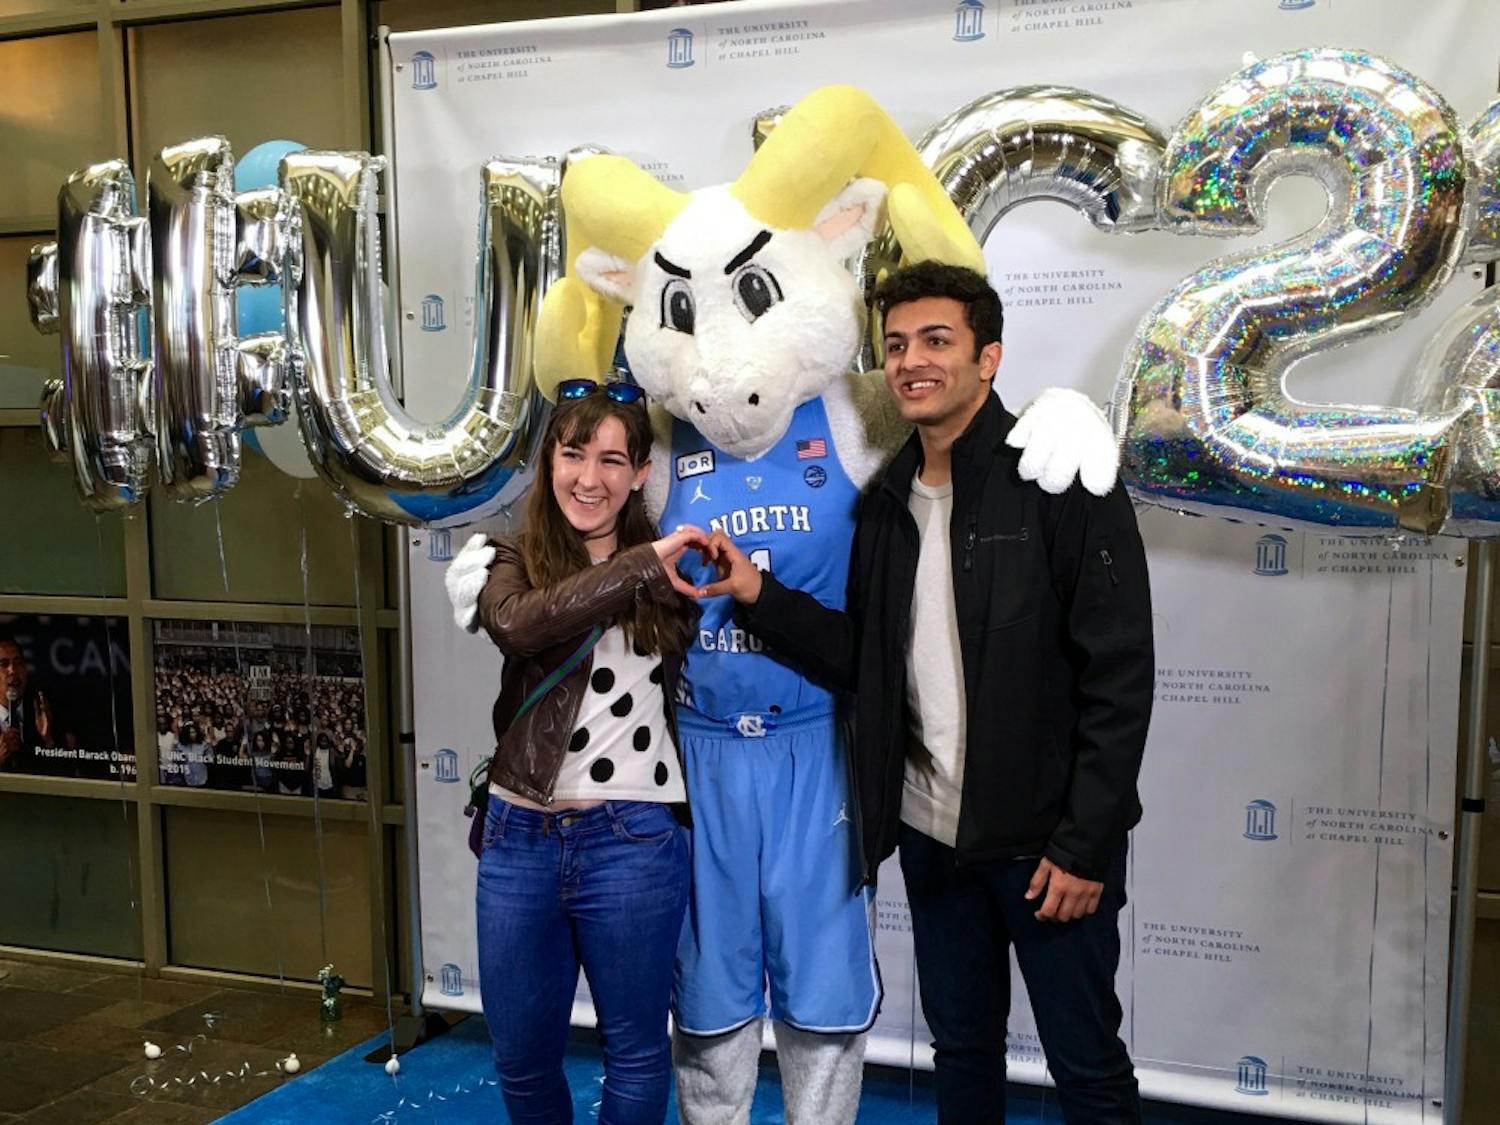 Lauren Kane (pictured left) and Sheel Patel (pictured right) at a UNC Class of 2022 event. (Photo courtesy of Sheel Patel)